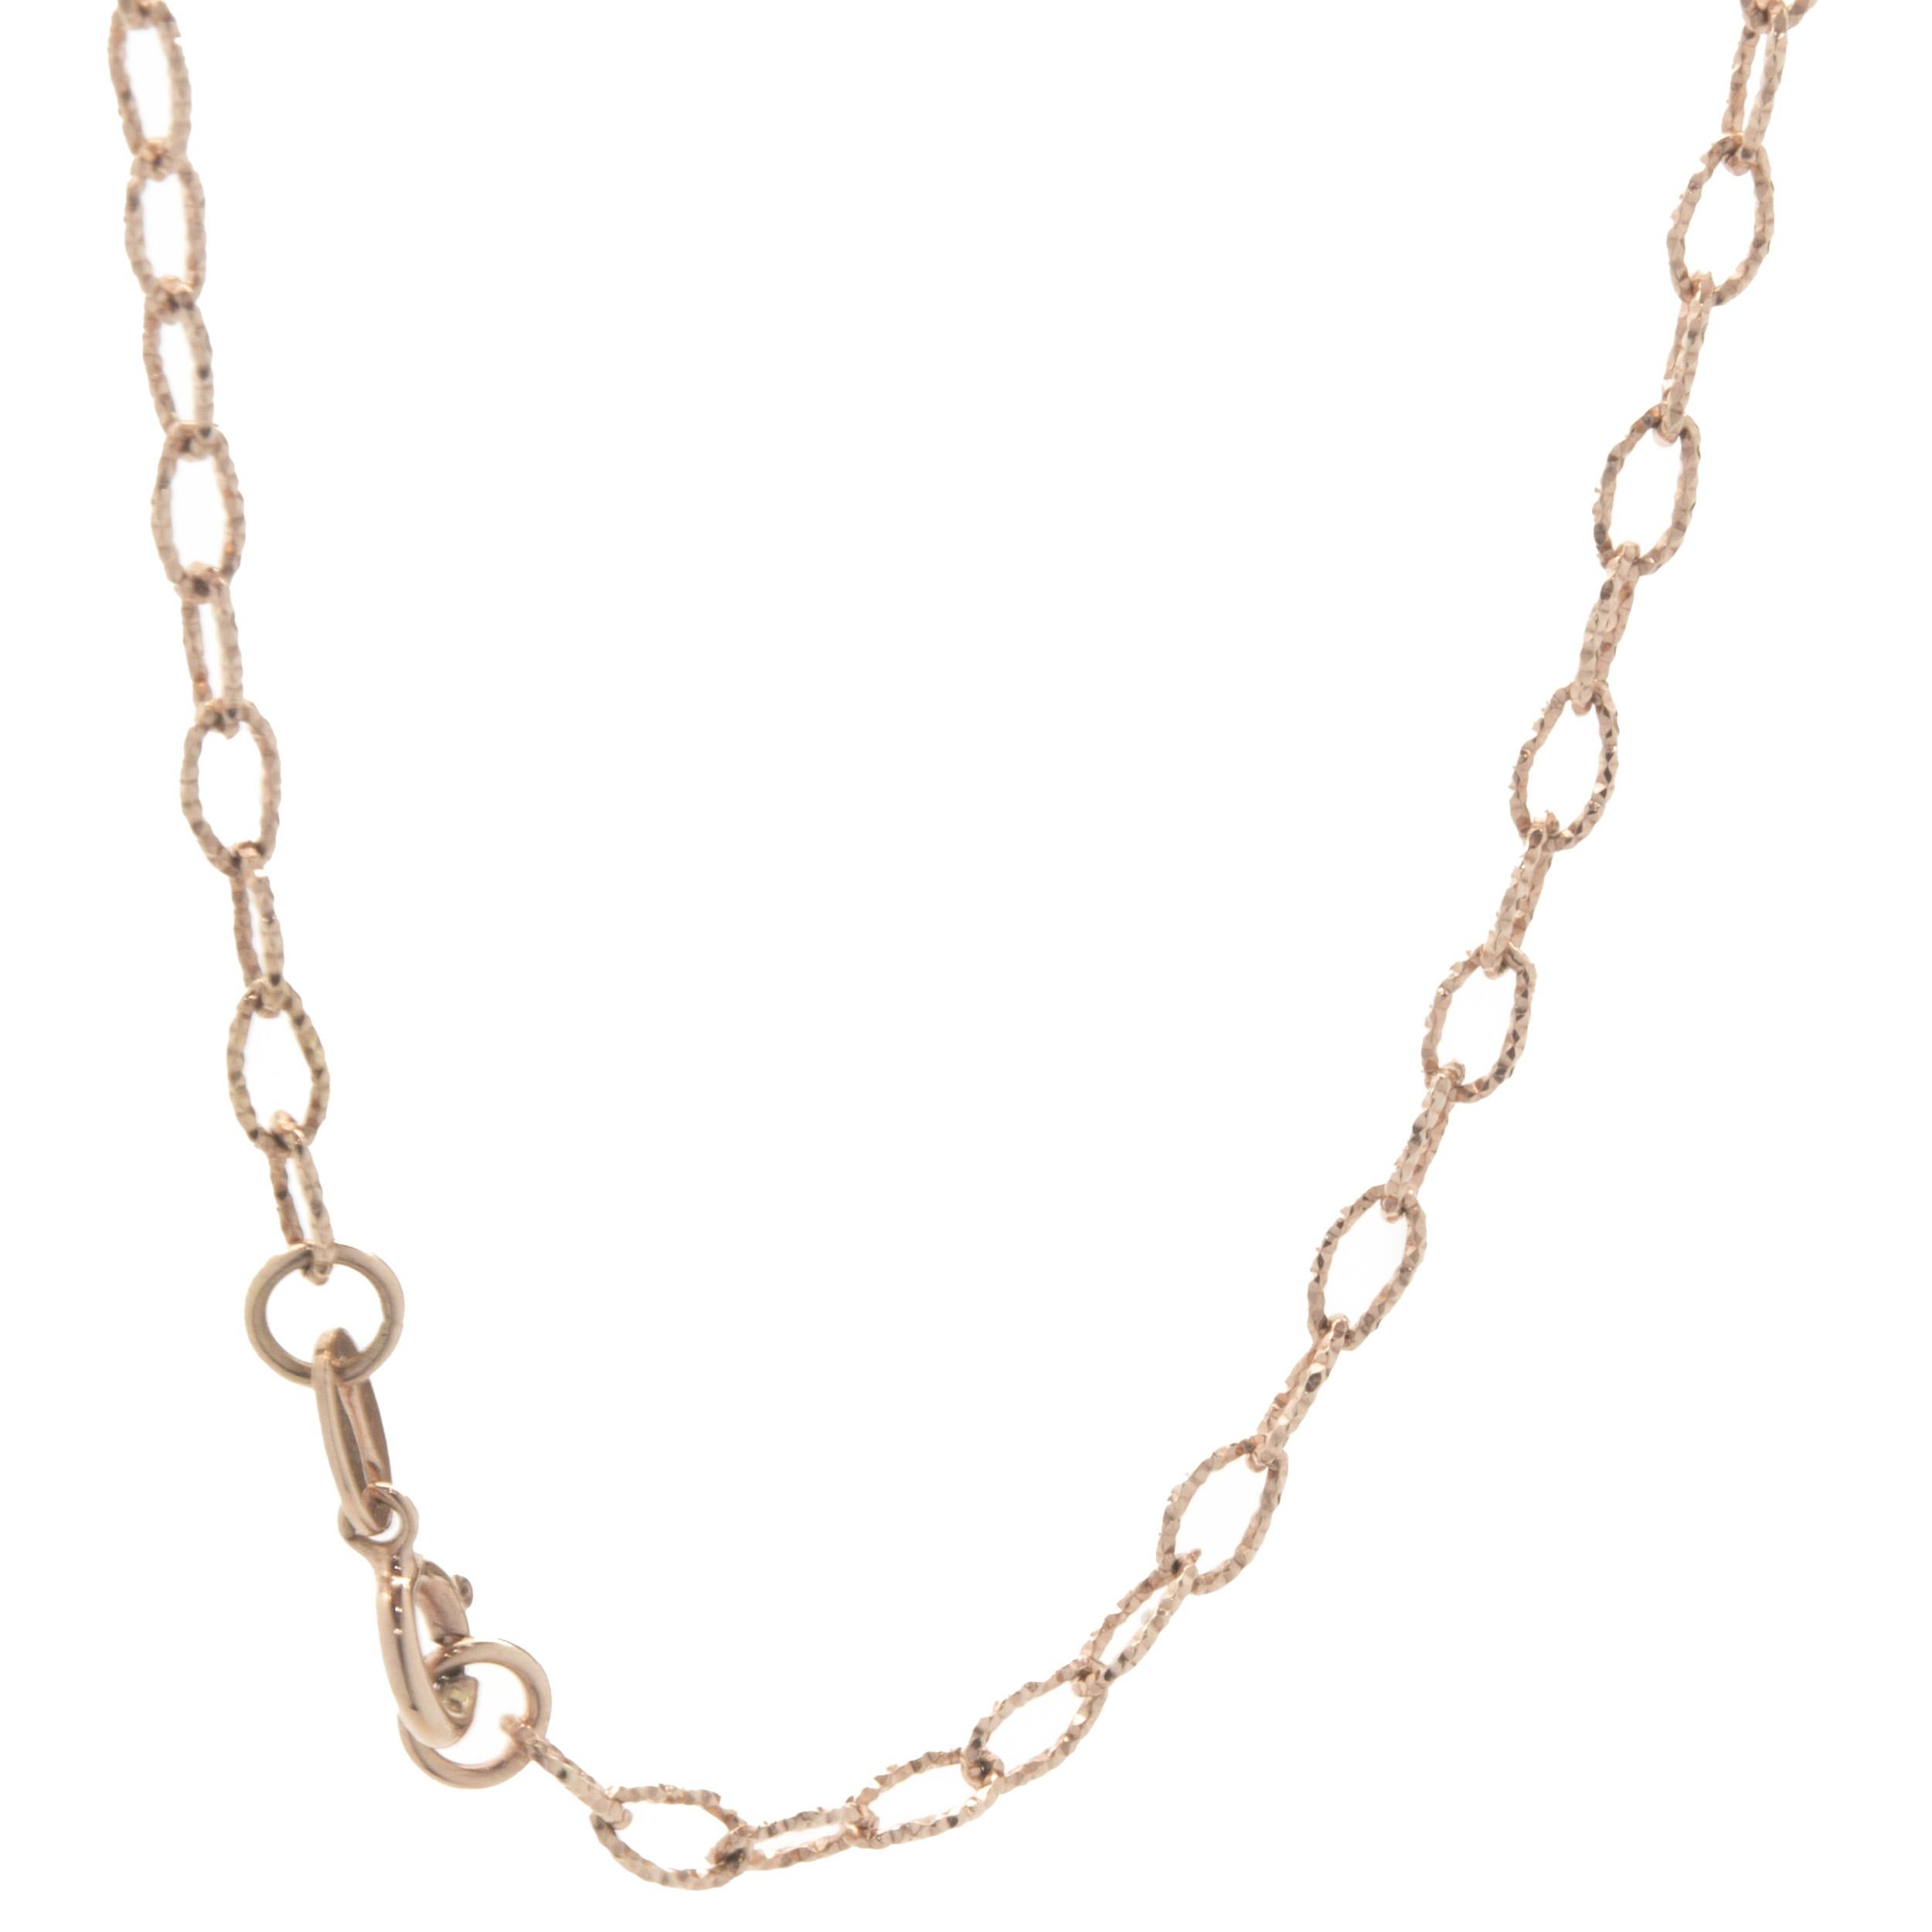 Material: 14K rose gold
Dimension: necklace measures 18-inches in length
Weight: 3.10 grams
